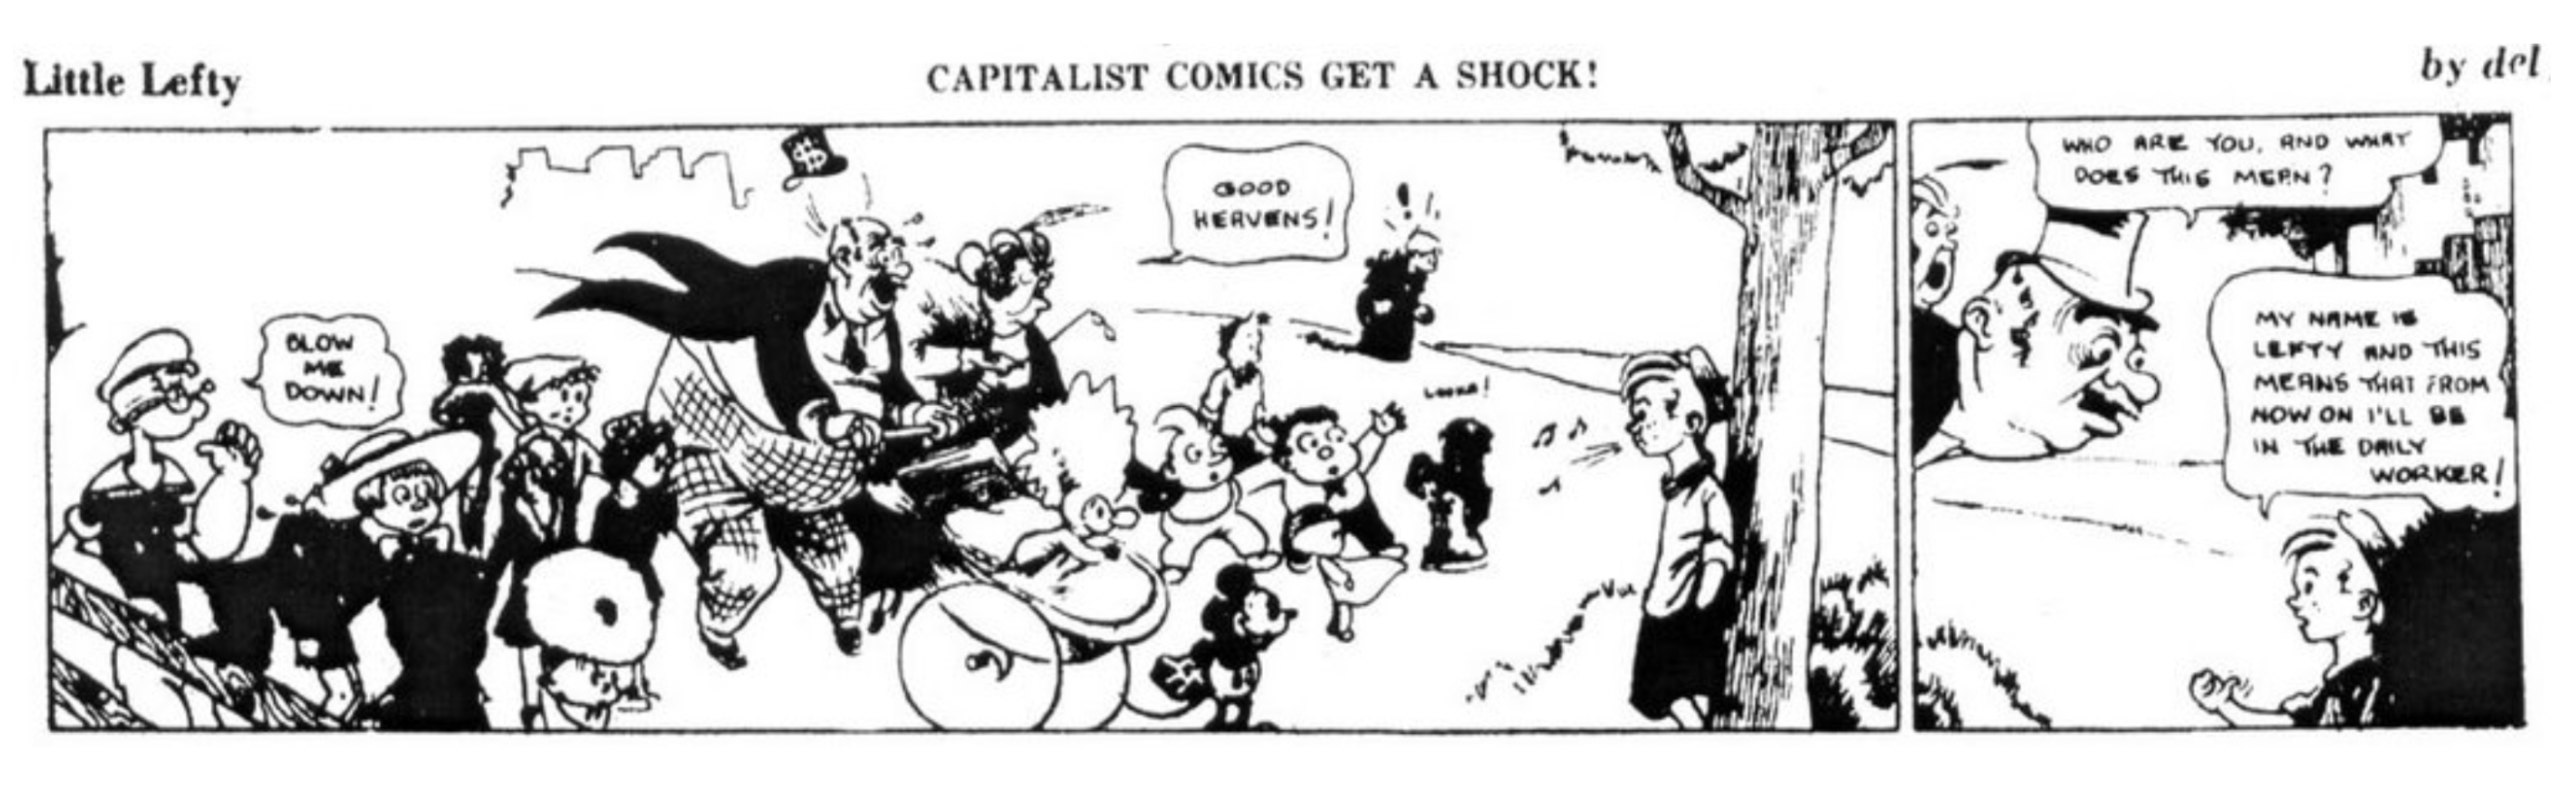 The Comics vs. the Communists: The Left During the Comic Book Scare